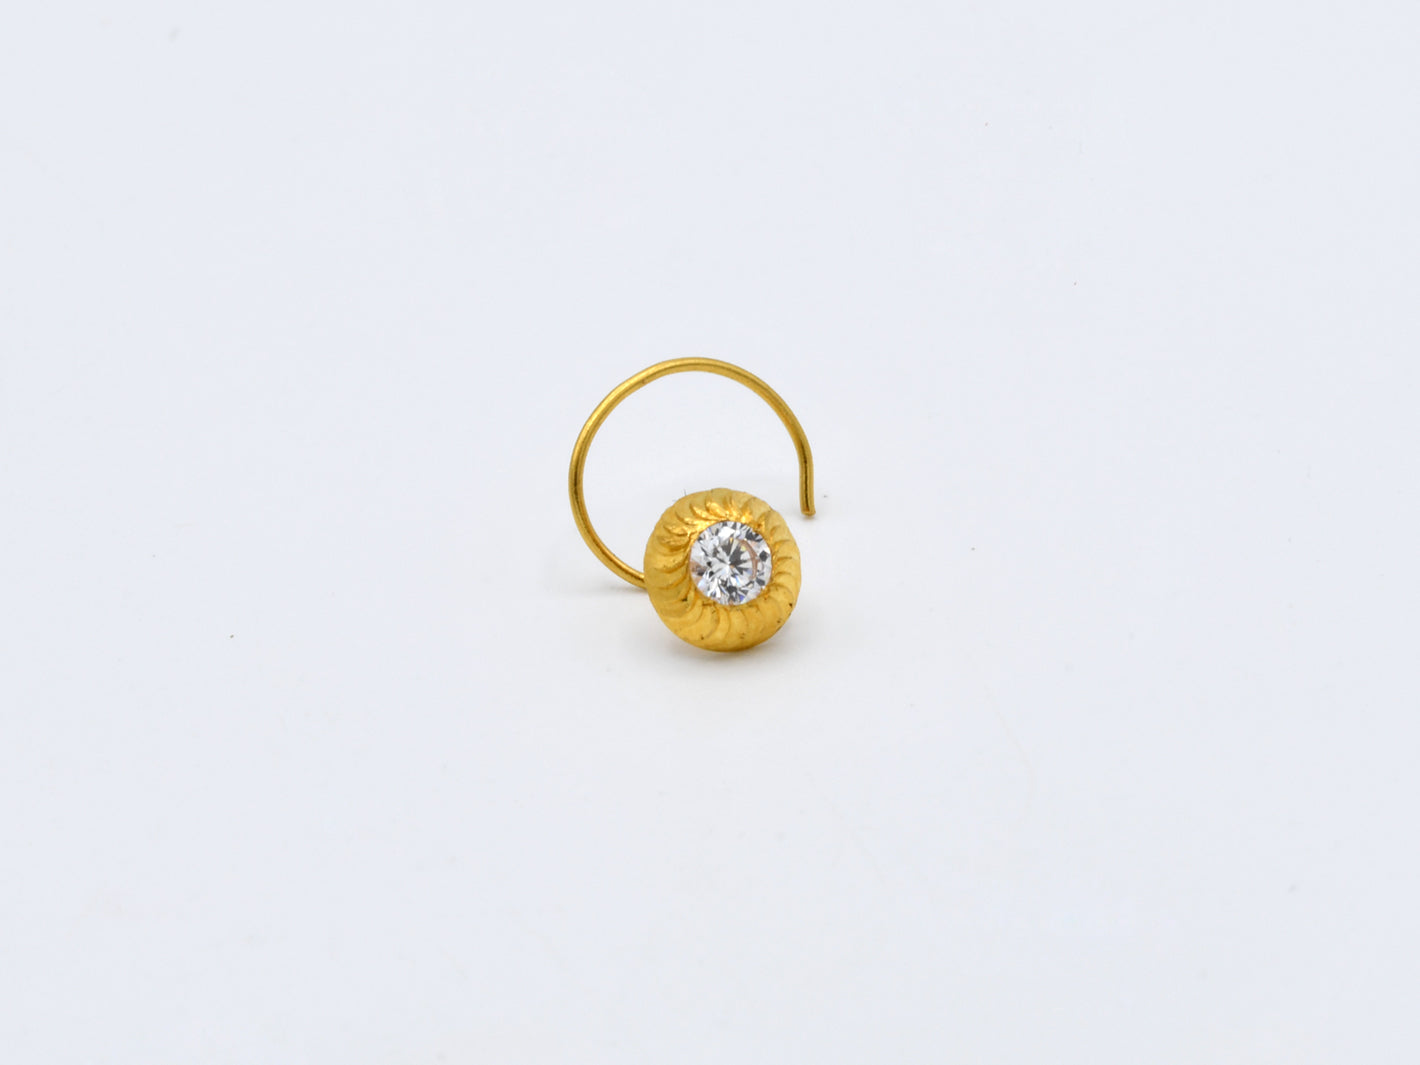 22ct Gold CZ Nose Pin - 5 mm - Roop Darshan